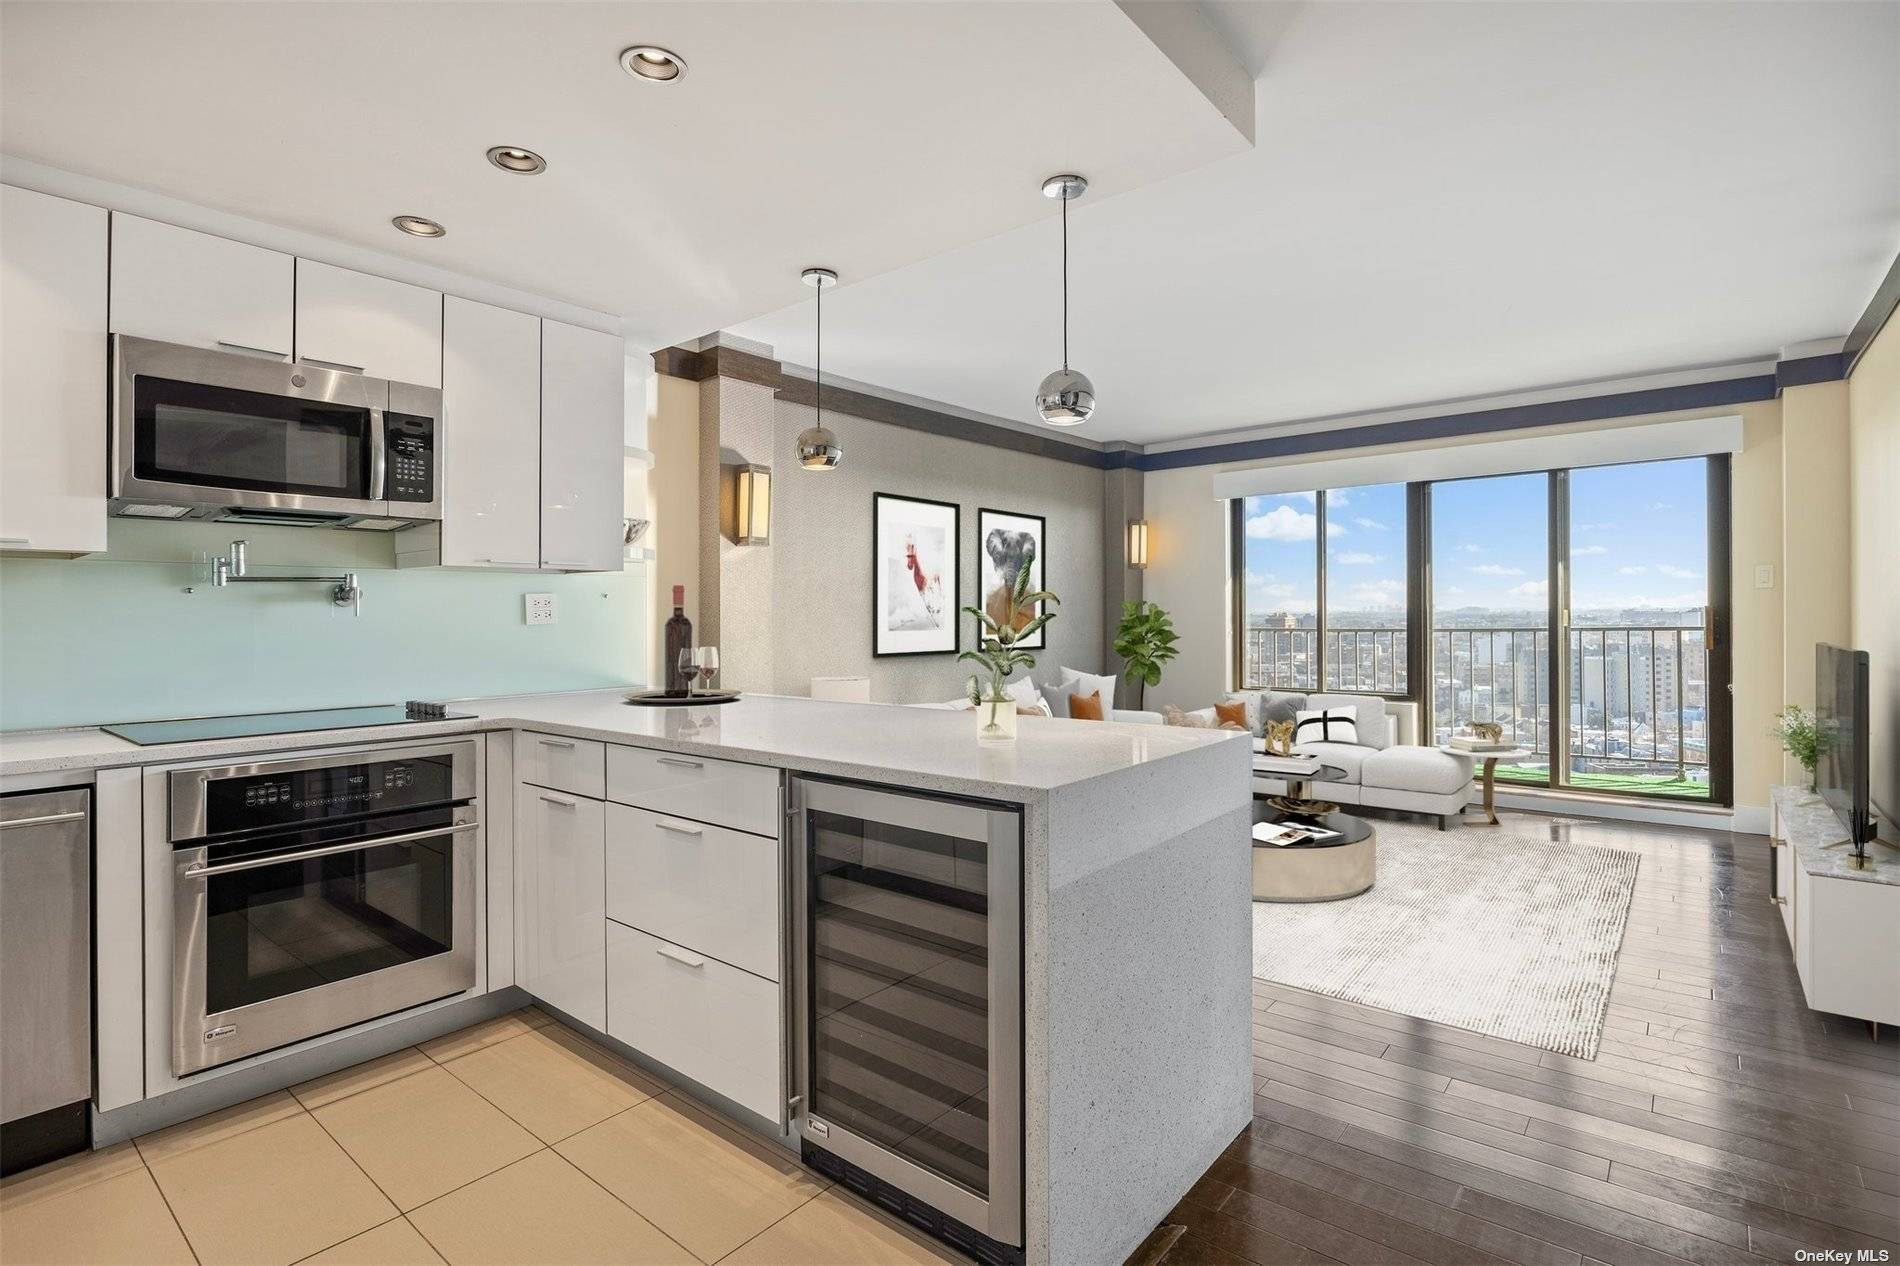 Nestled between Astoria Park and the East River, the Shore Towers is an exquisite condo building offering an unparalleled blend of contemporary elegance, tons of amenities, and panoramic views of ...